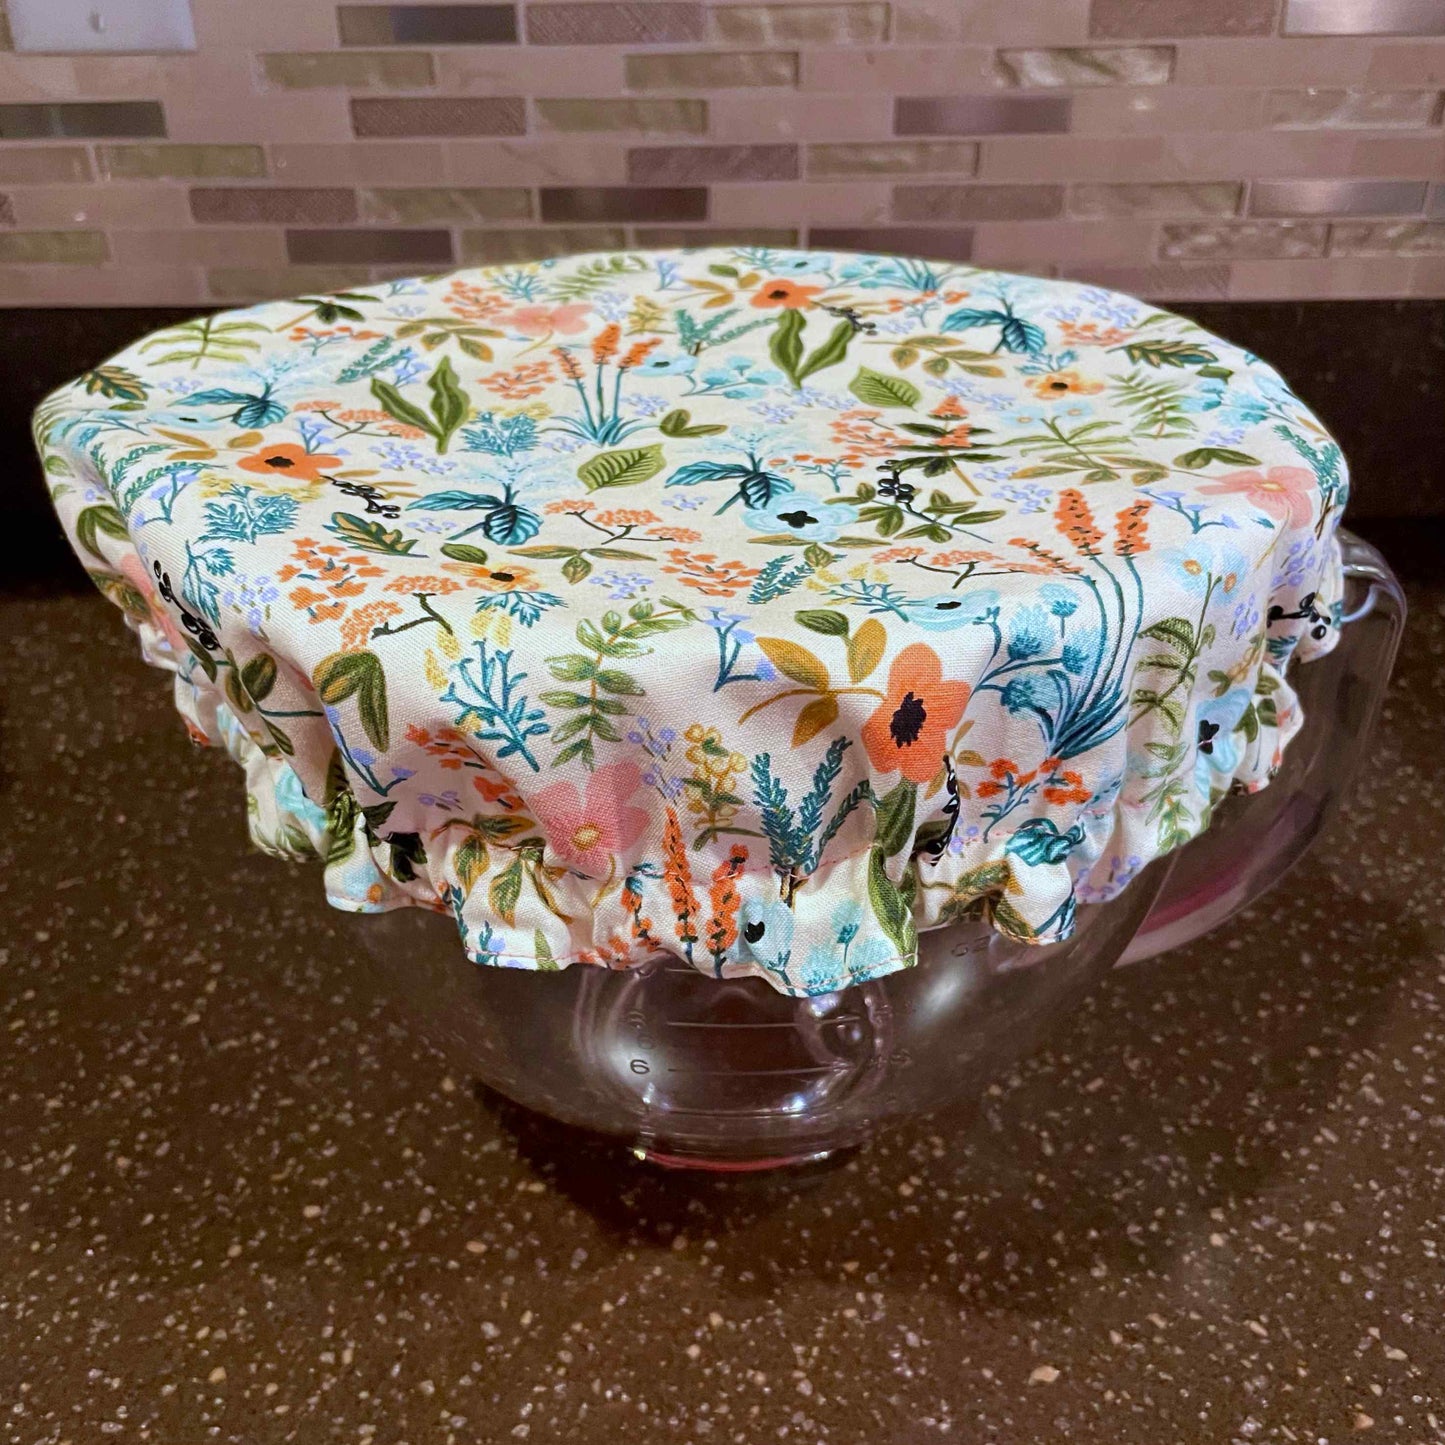 Stand Mixer Bowl Covers - Floral Herb Garden